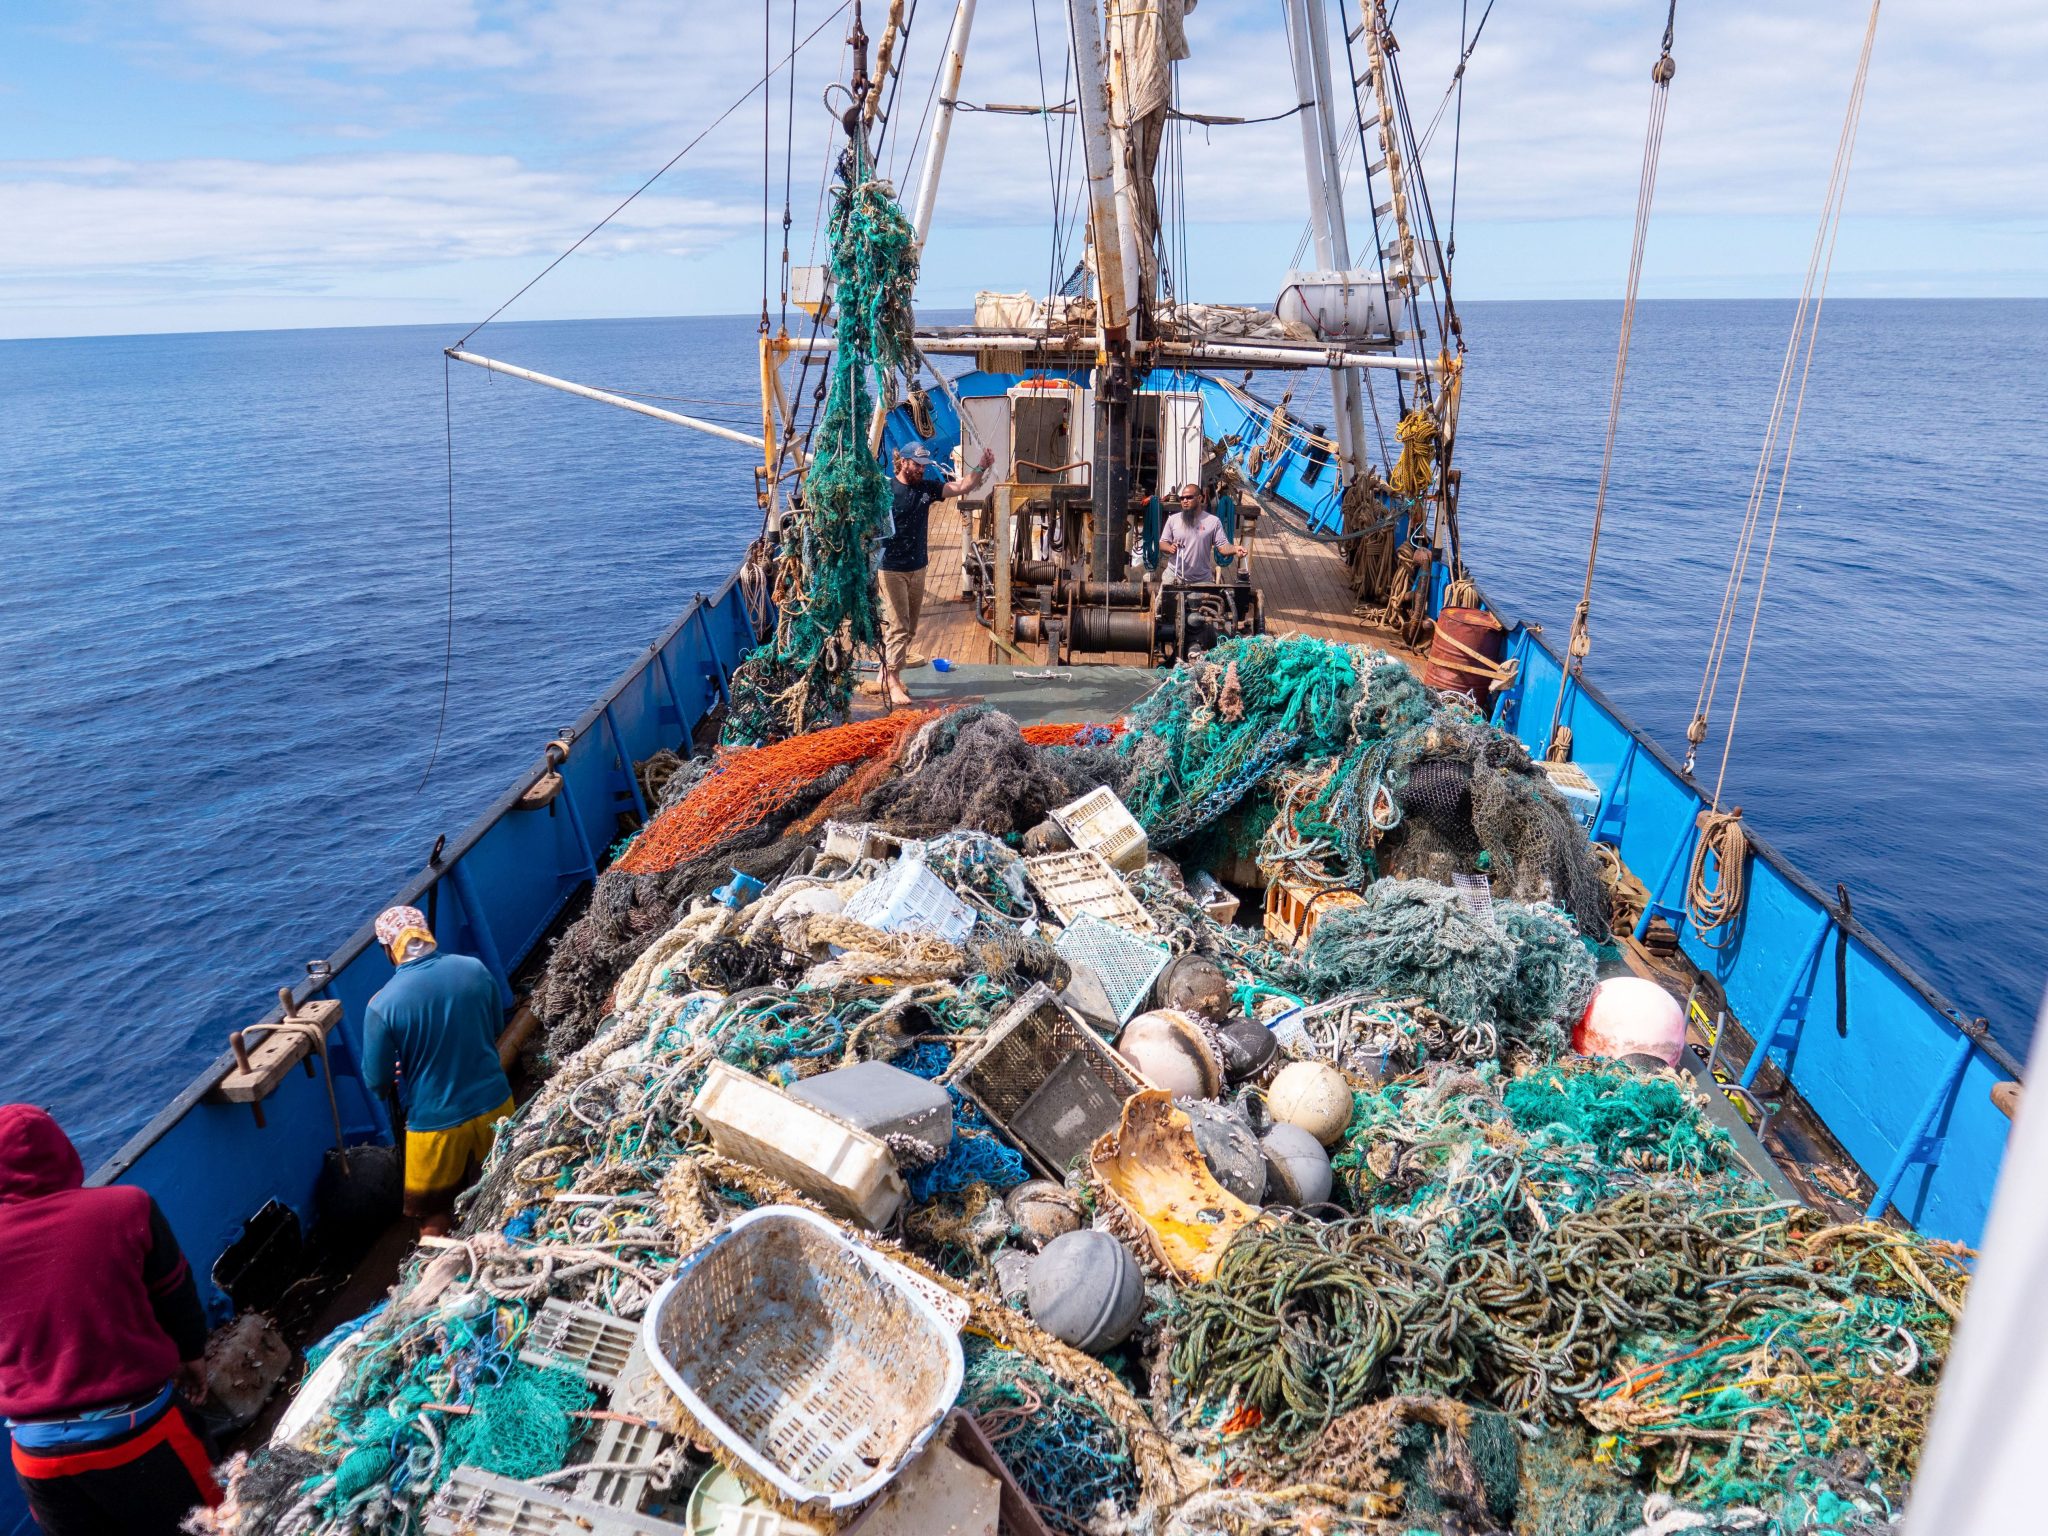 Ocean Voyages Institute’s high seas clean-up expedition began in May, with a 48-day mission, followed by a second 35-day leg which departed on July 1st, with the KWAI logging more than 5000 nautical miles from Hawaii to the Pacific Gyre and back twice this summer.